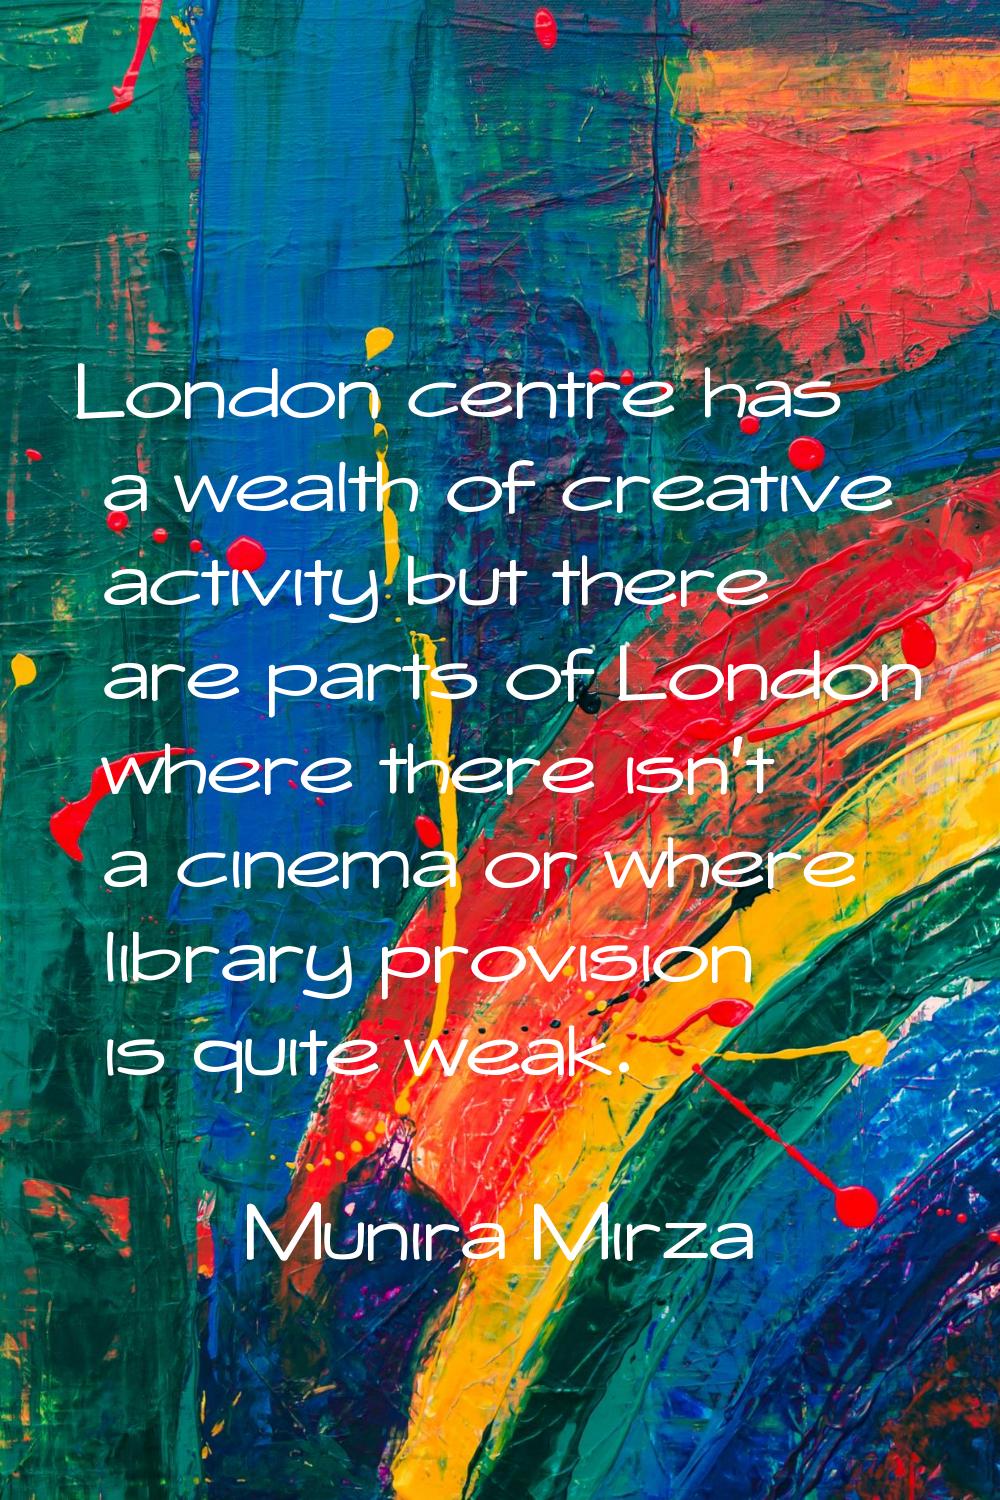 London centre has a wealth of creative activity but there are parts of London where there isn't a c